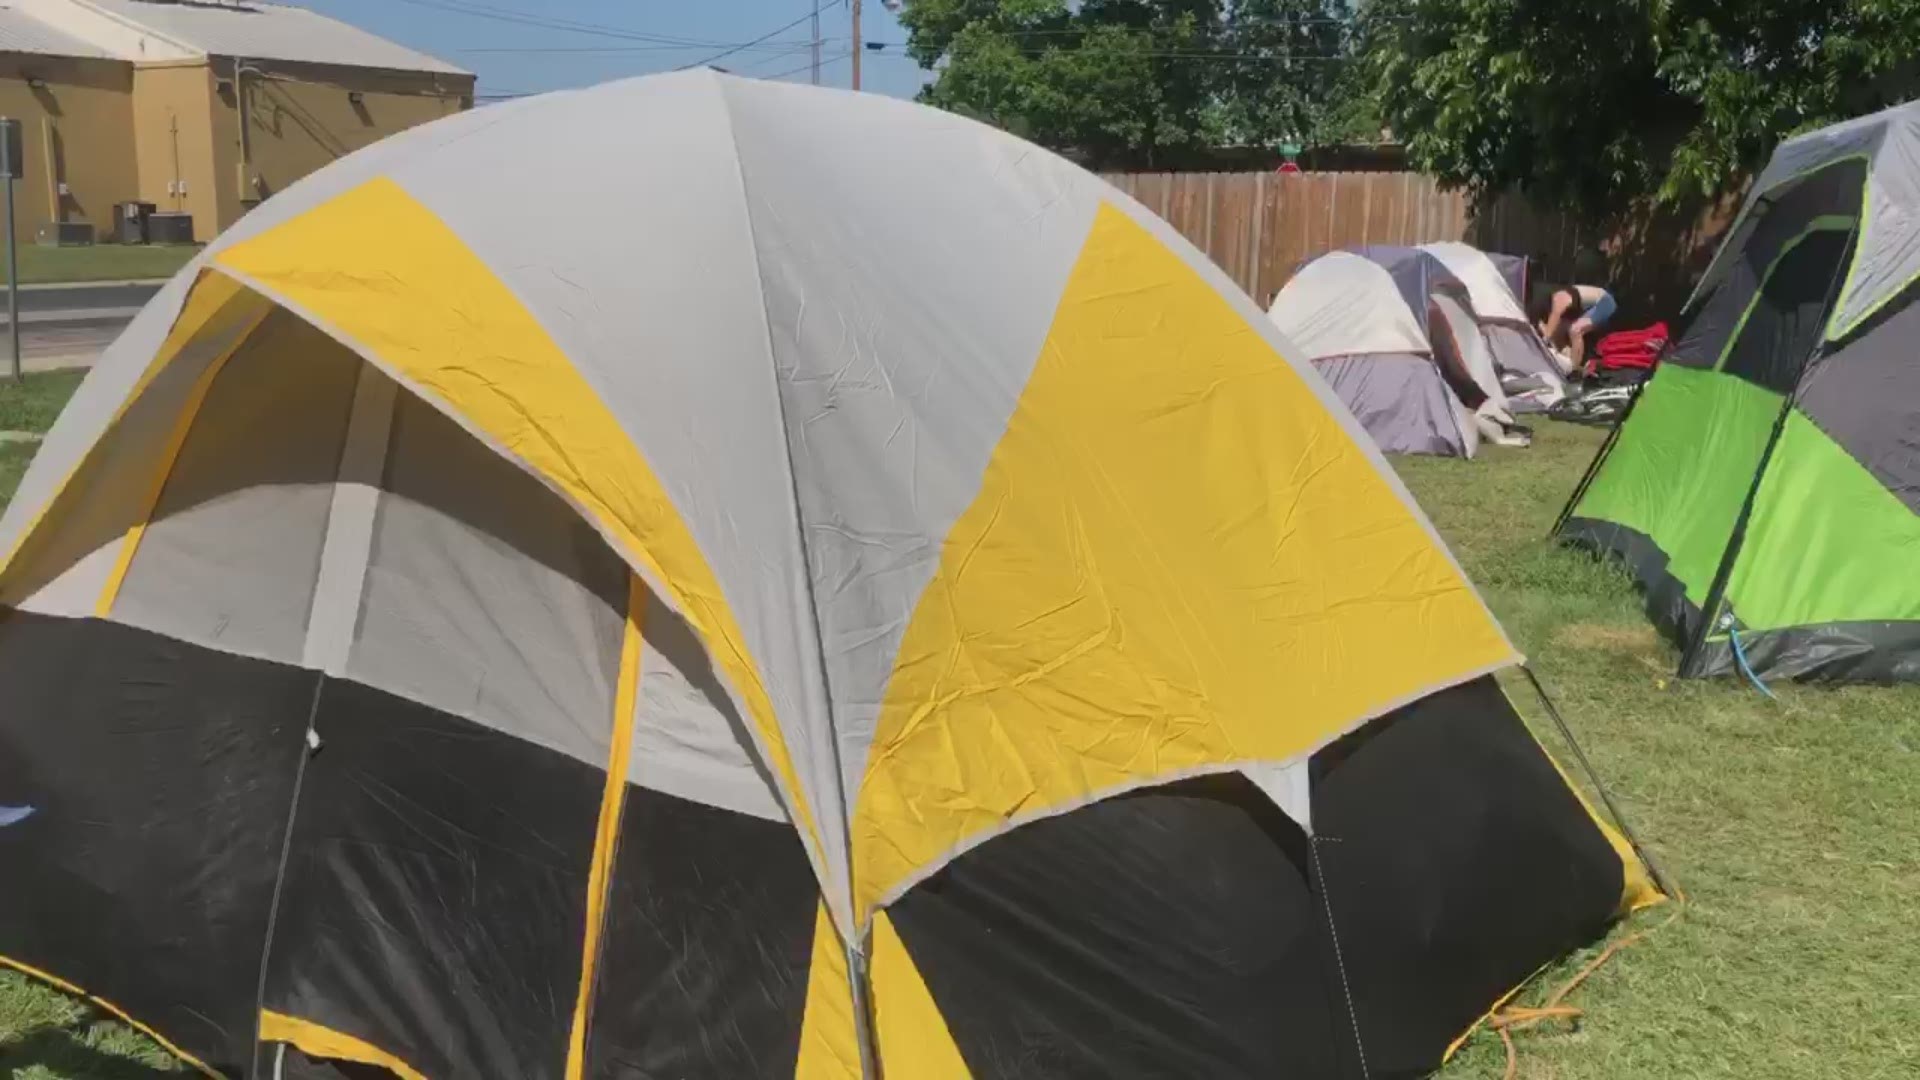 After the Friends in Crisis homeless shelter closed two months ago, a tent city formed in Killeen.